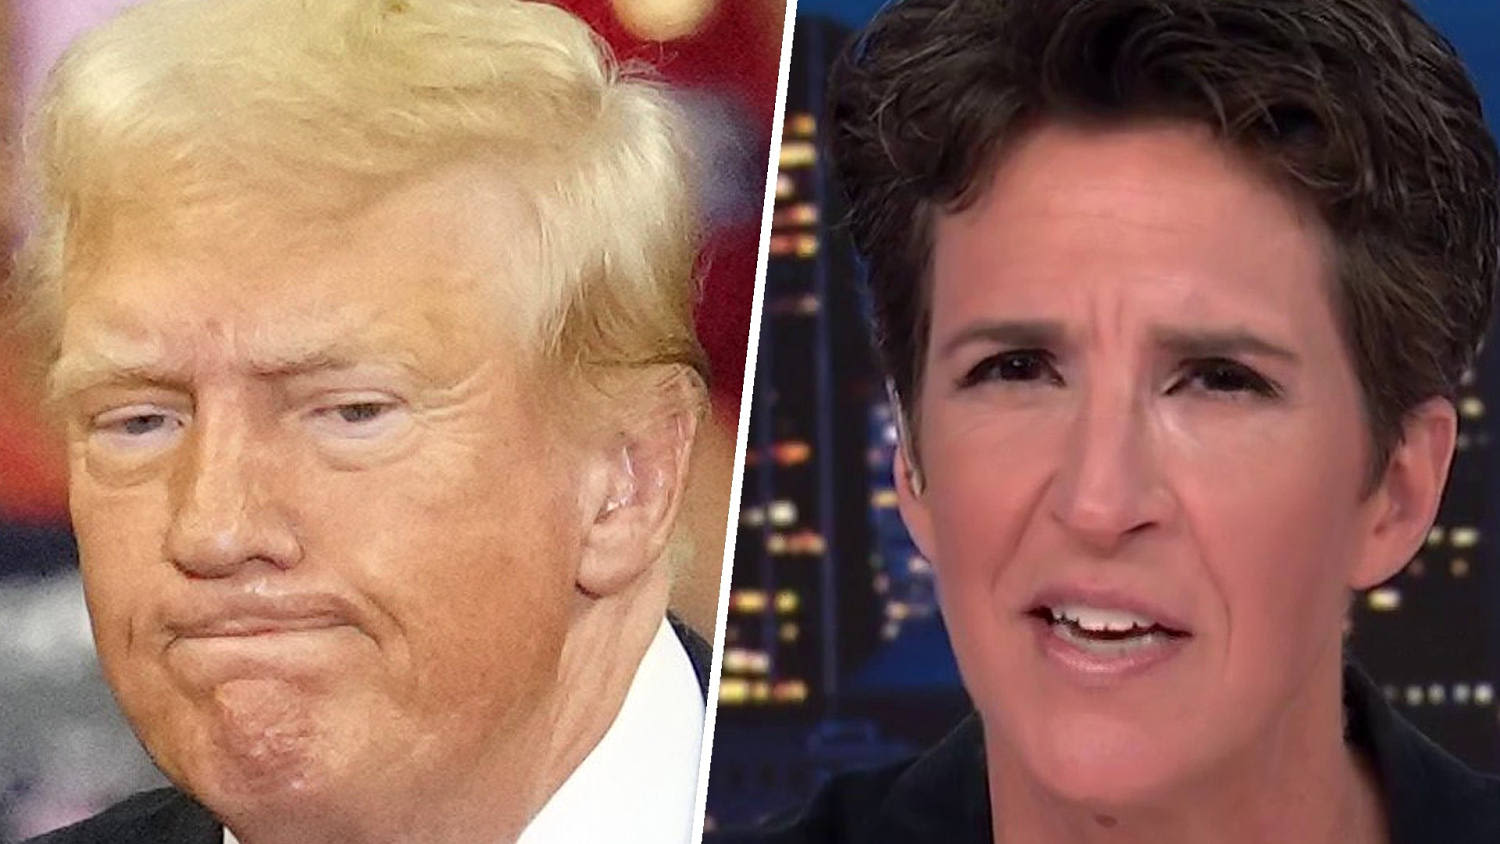 'Where did the cash go?': Maddow looks for clues in new report about Trump, Egypt and $10 million